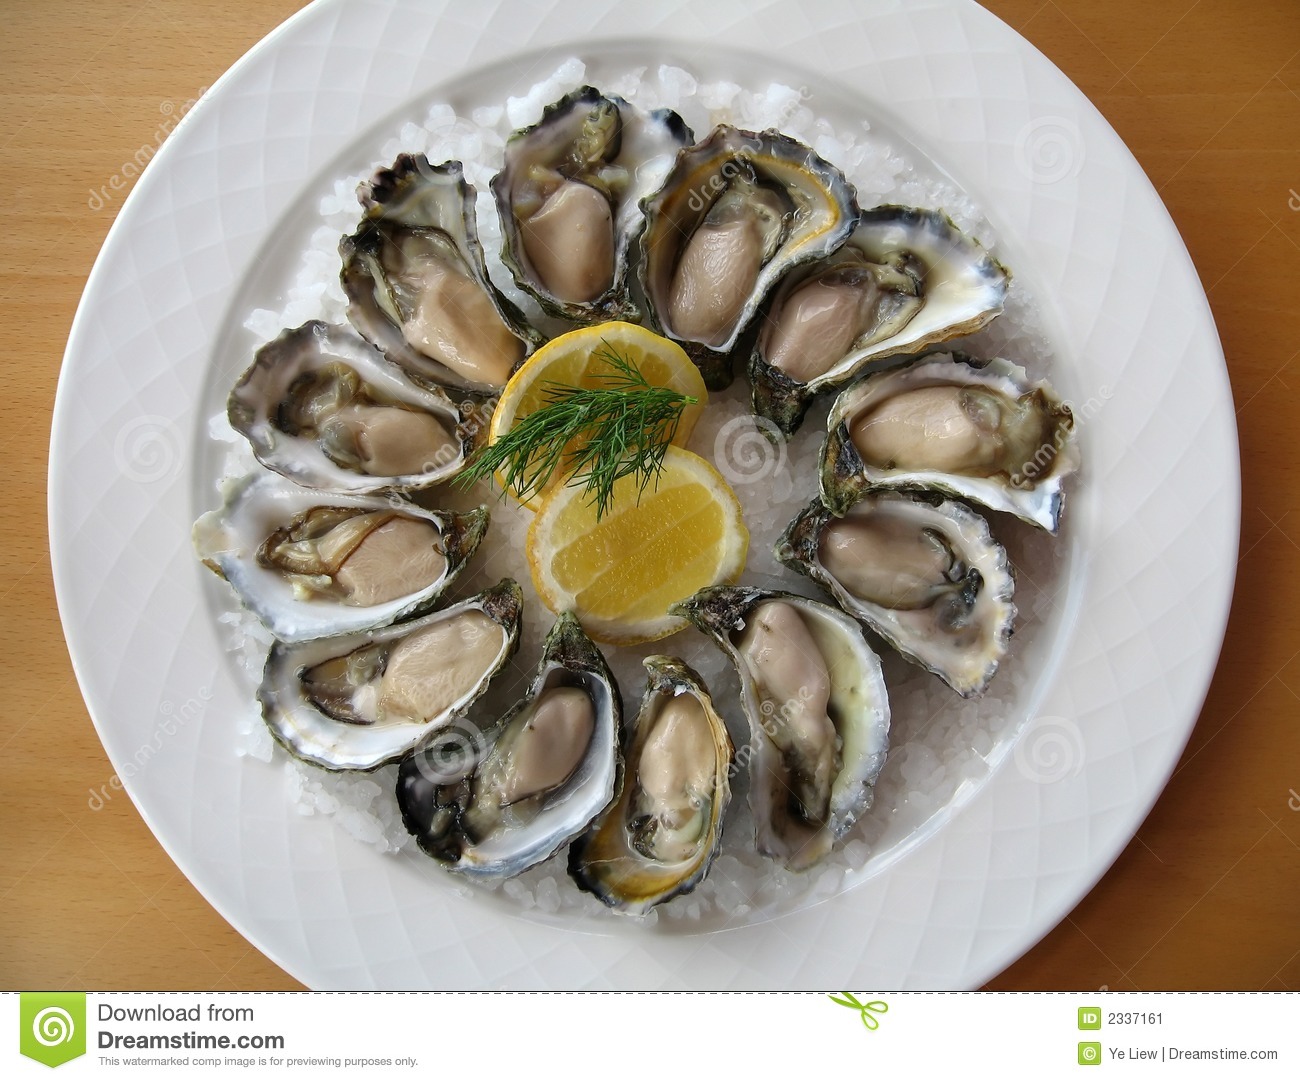 Dozen Of Fresh Natural Oysters Presented On Sea Salt With Slices Of